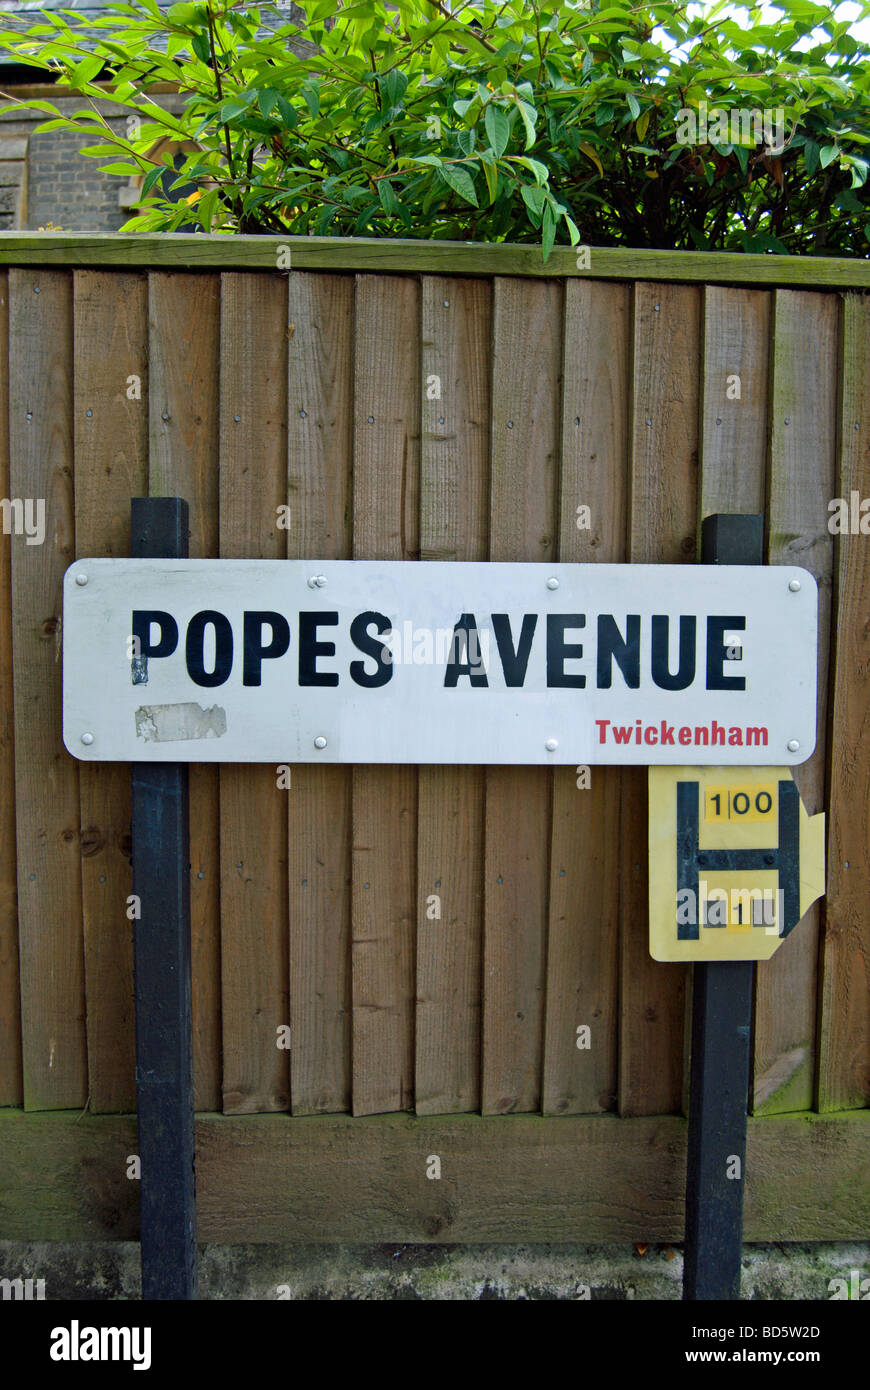 popes avenue, named after the 18th century satirical writer and local resident alexander pope, in twickenham, middlesex, england Stock Photo